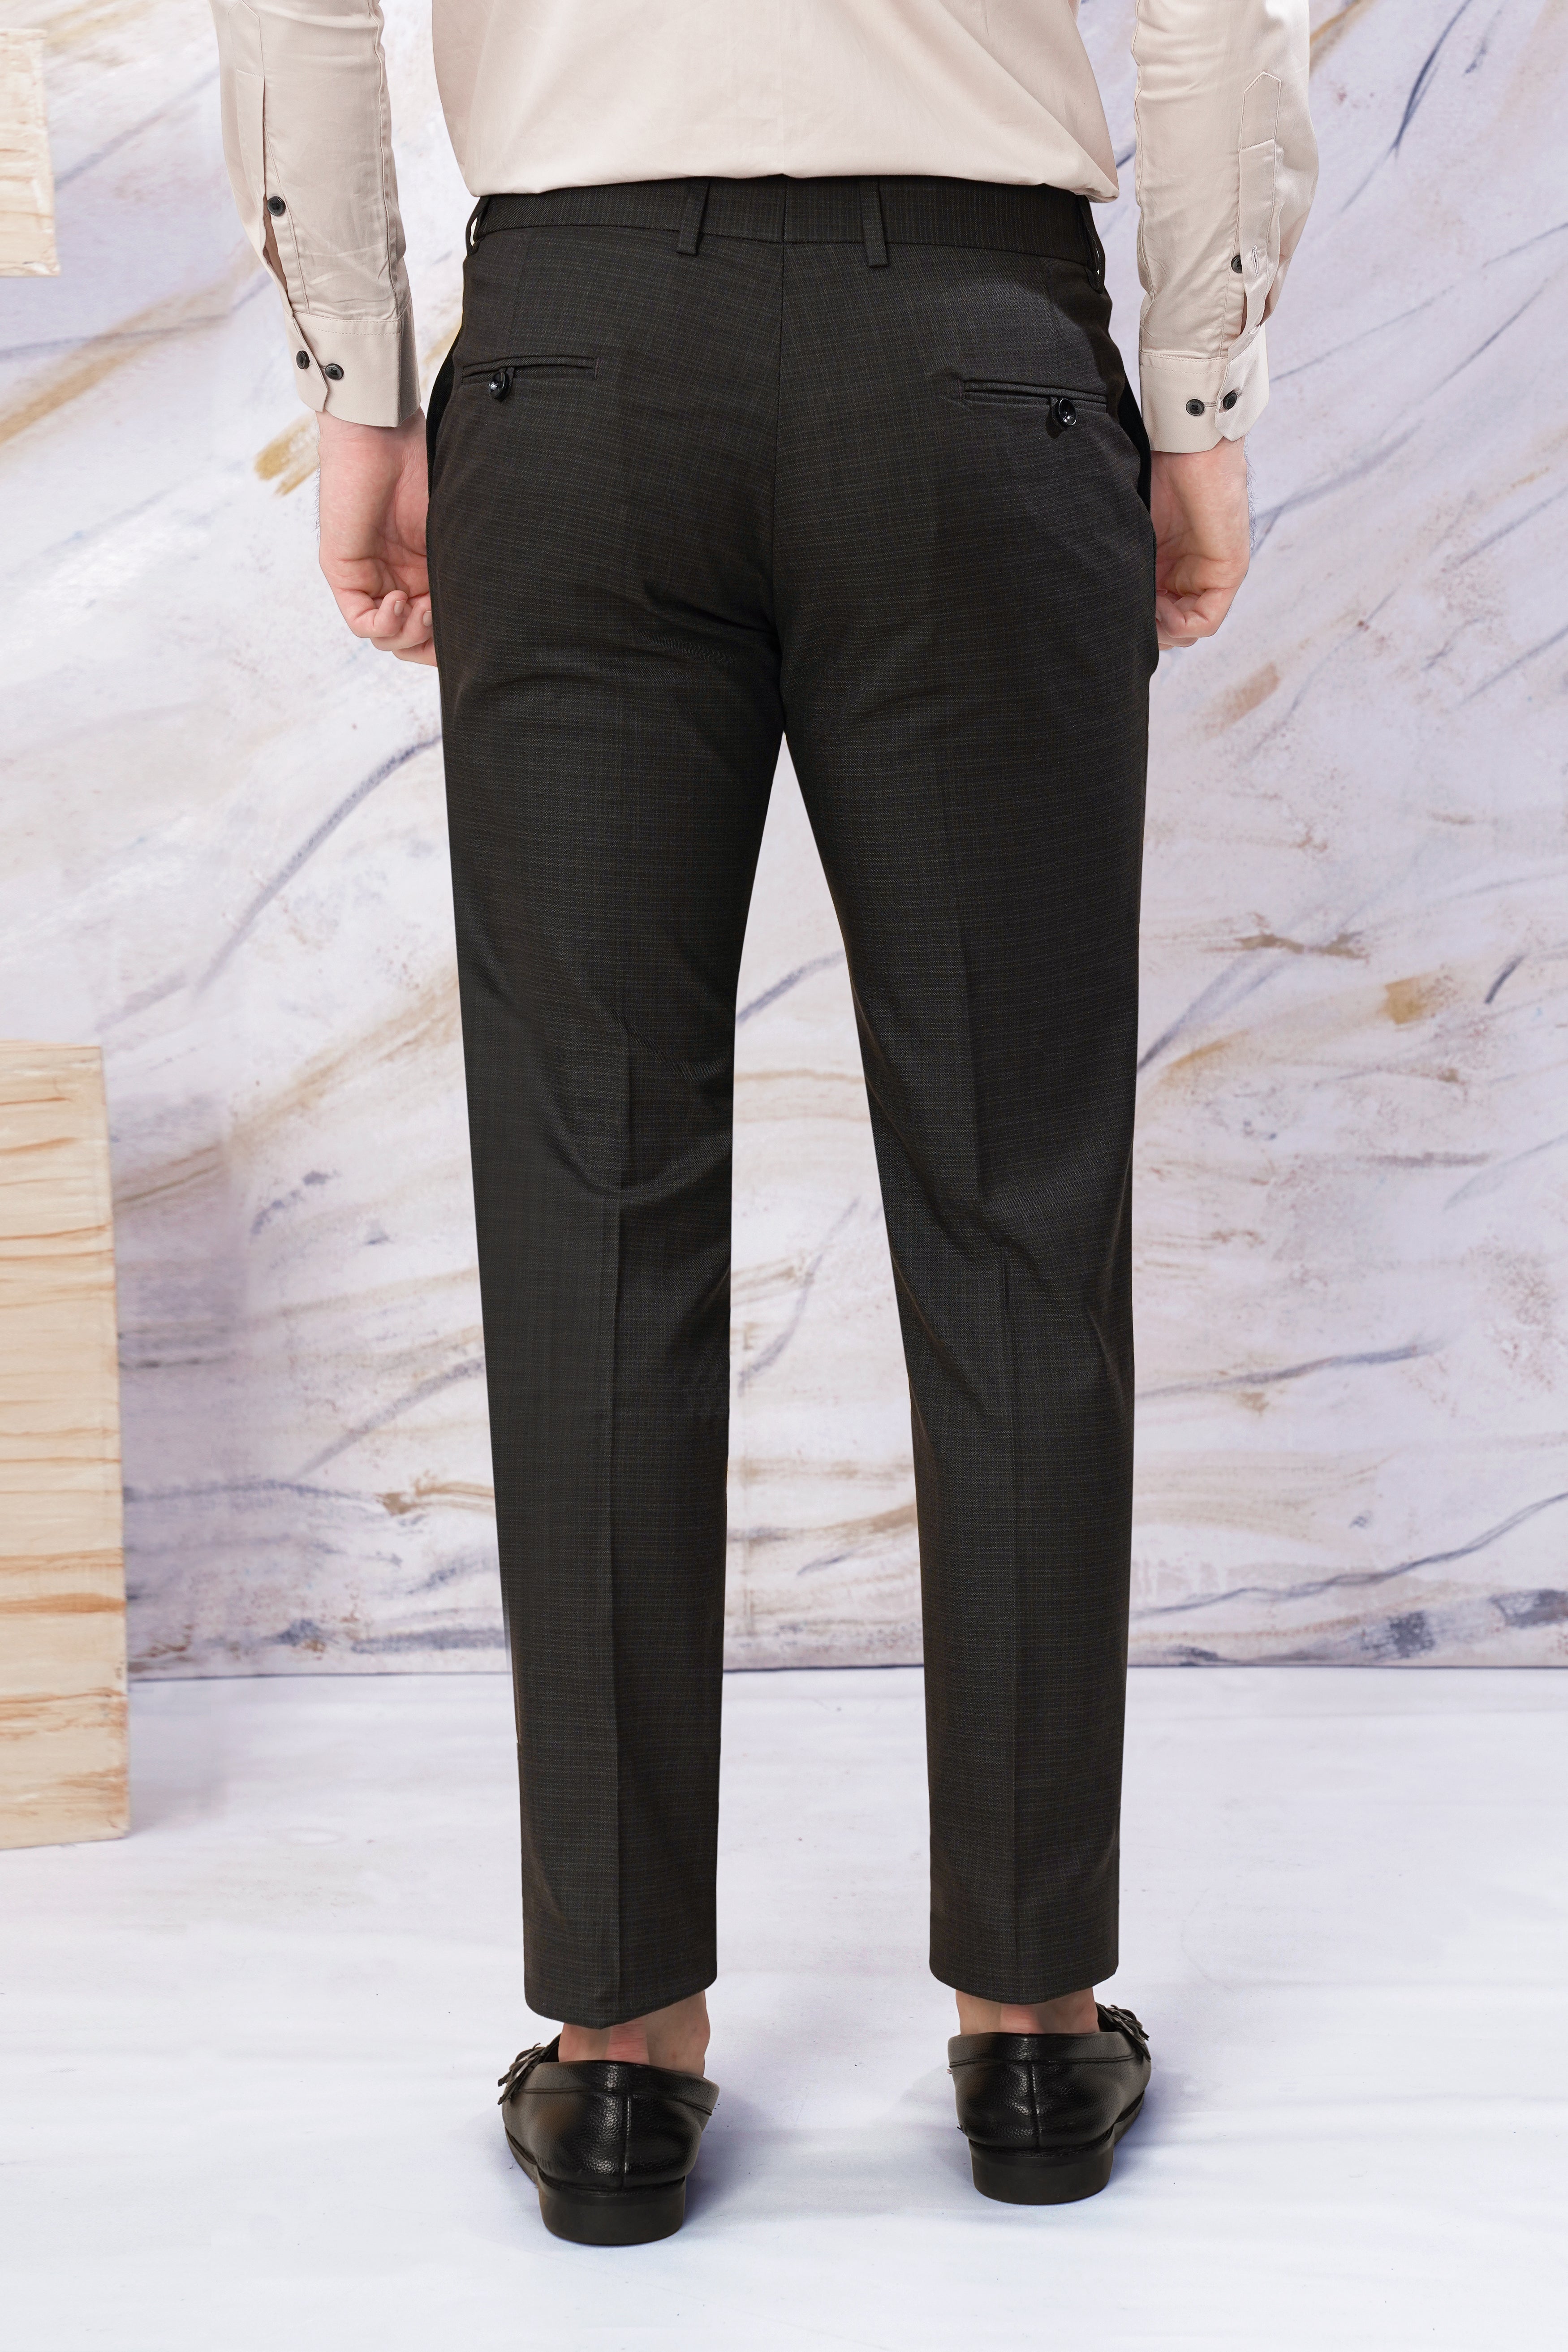 Zeus Black Subtle Checkered Wool Rich Stretchable Waistband Pant